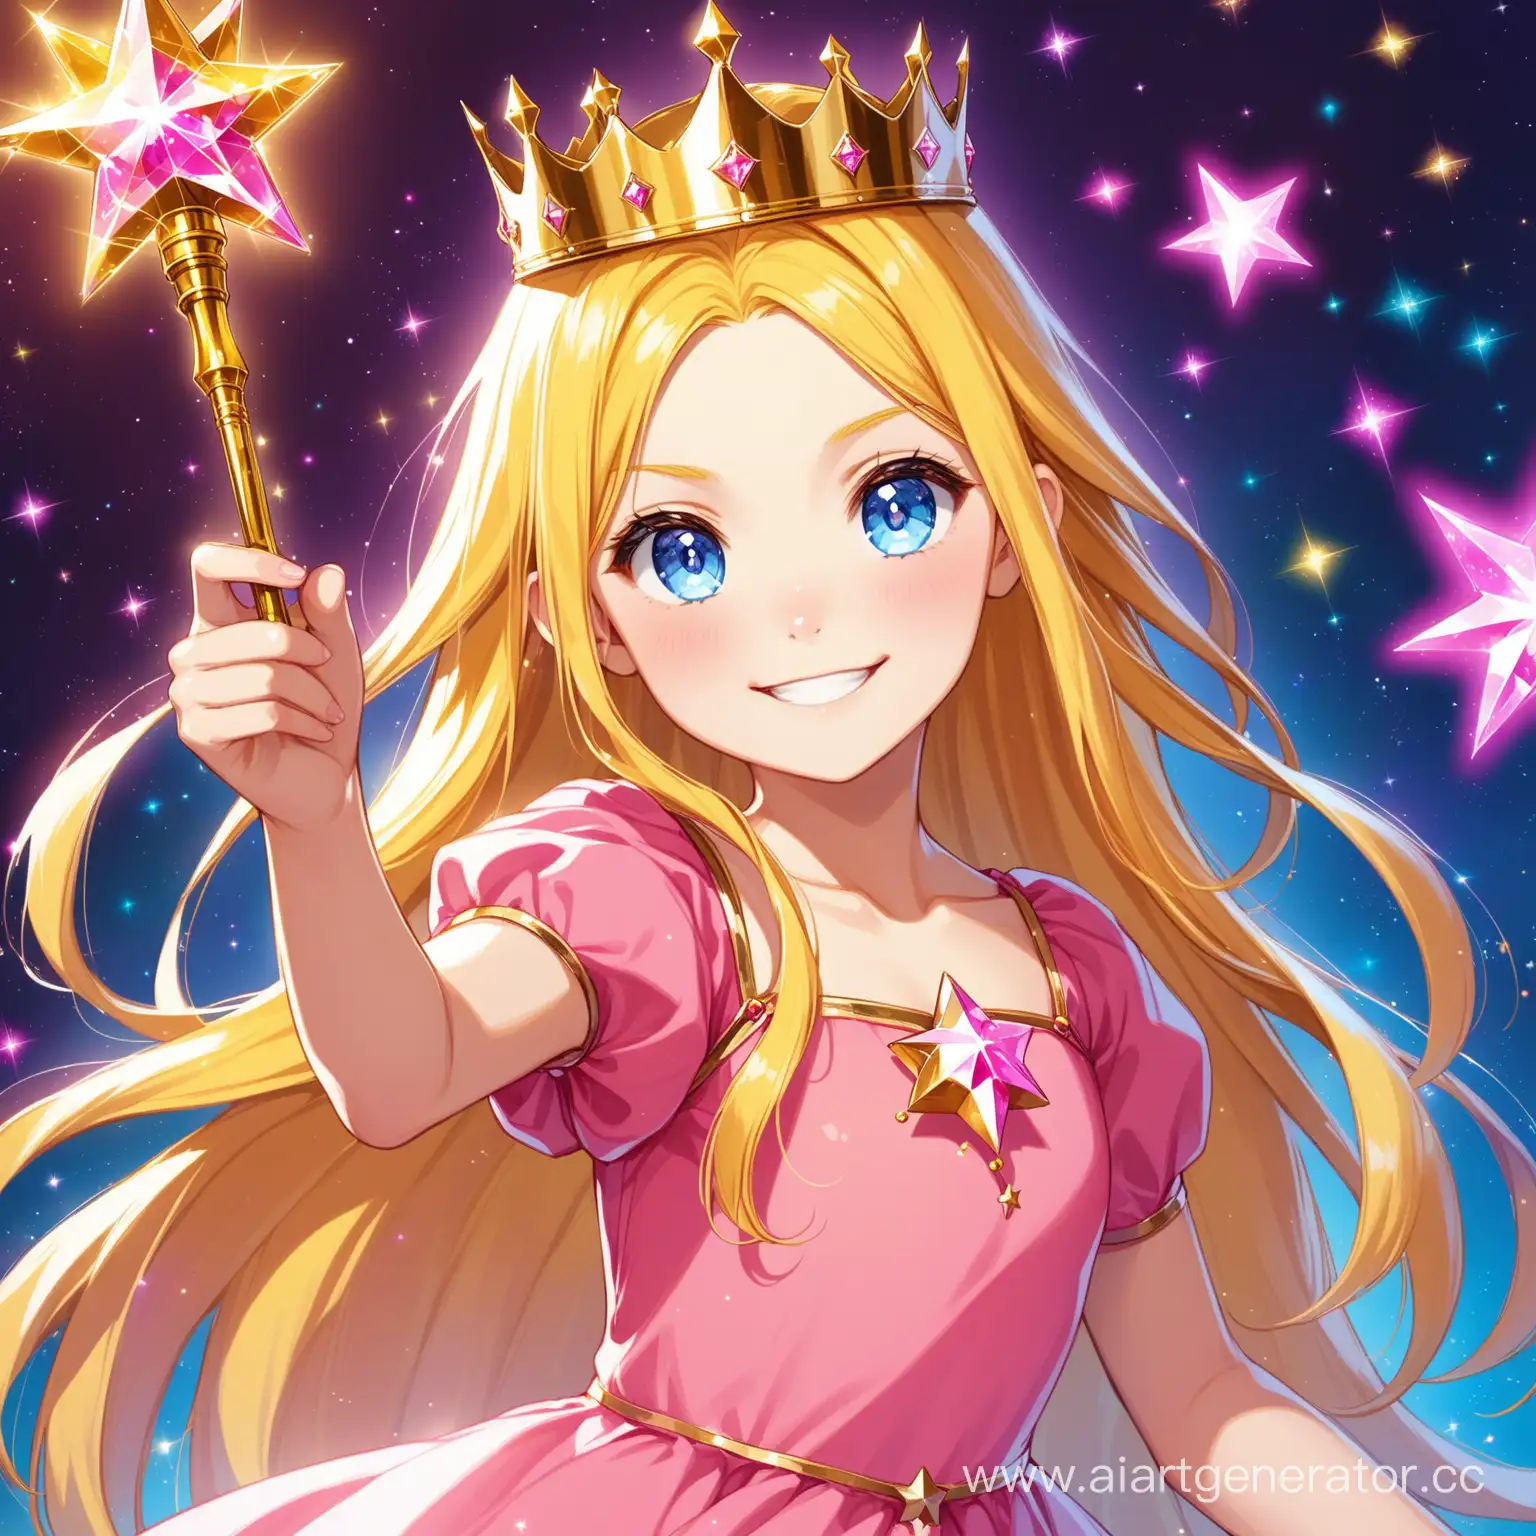 Malicious-Young-Sorceress-with-Golden-Crown-and-Magic-Wand